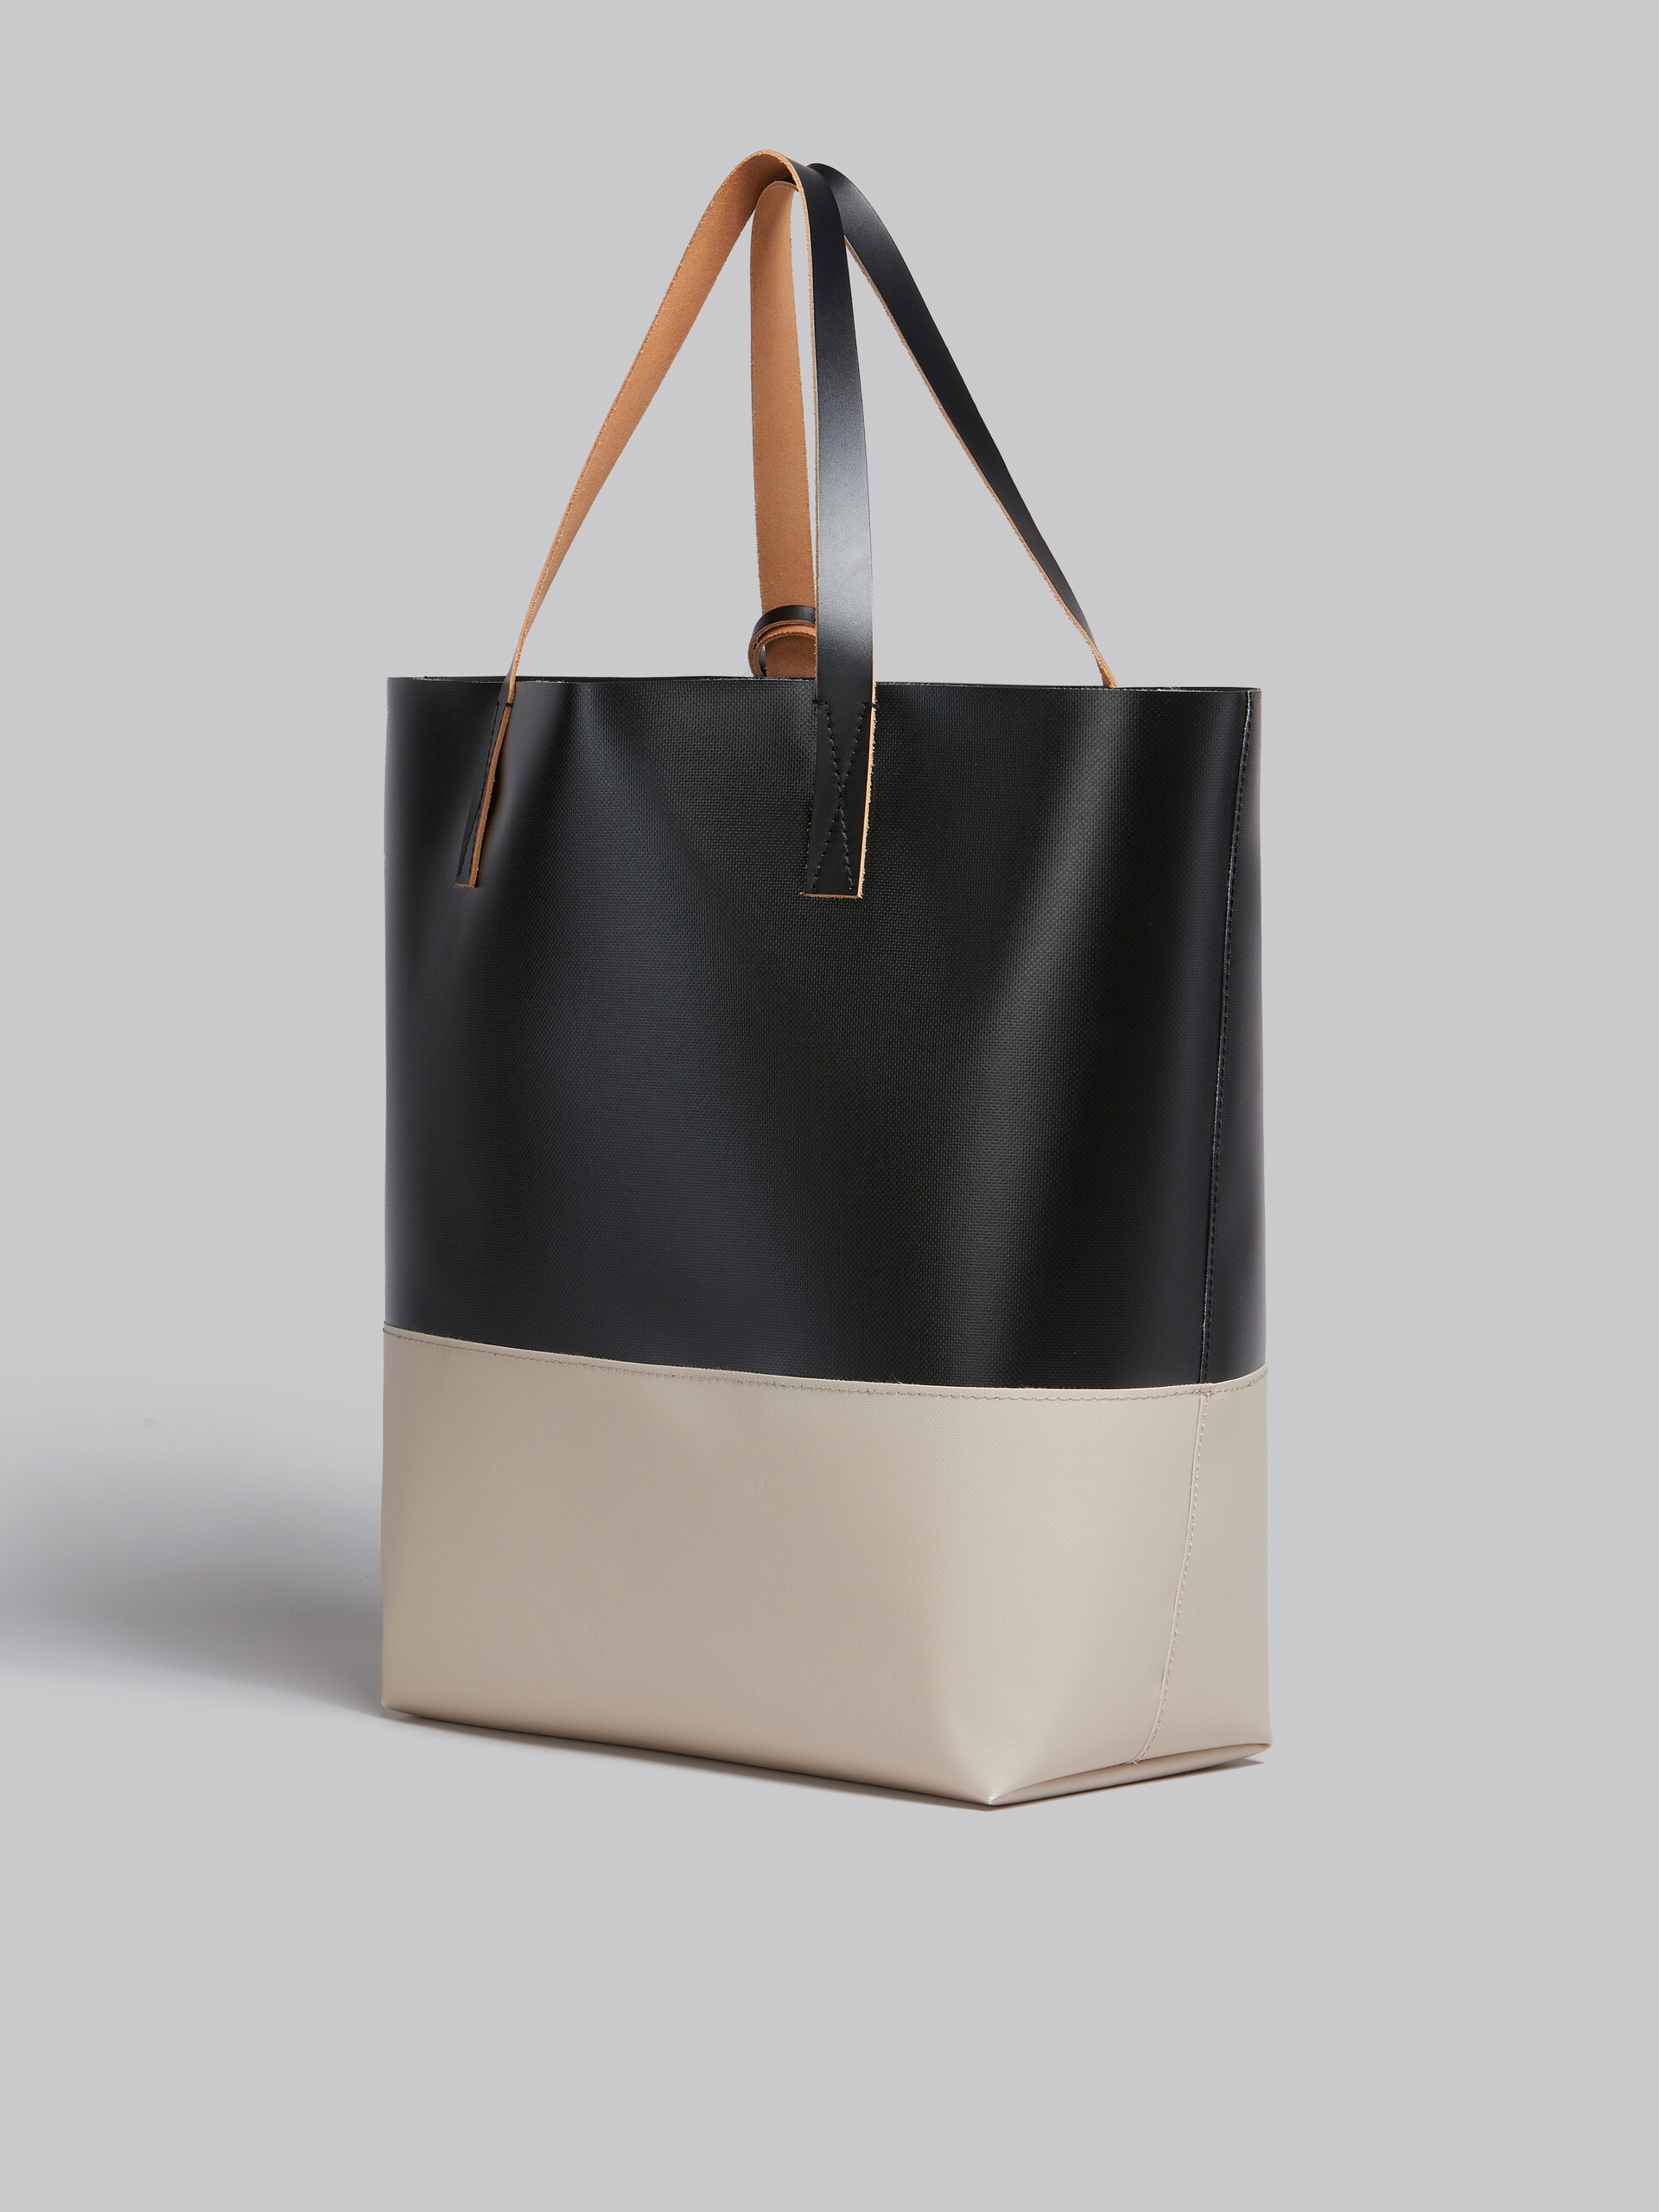 Tribeca shopping bag in blue and black - Shopping Bags - Image 2